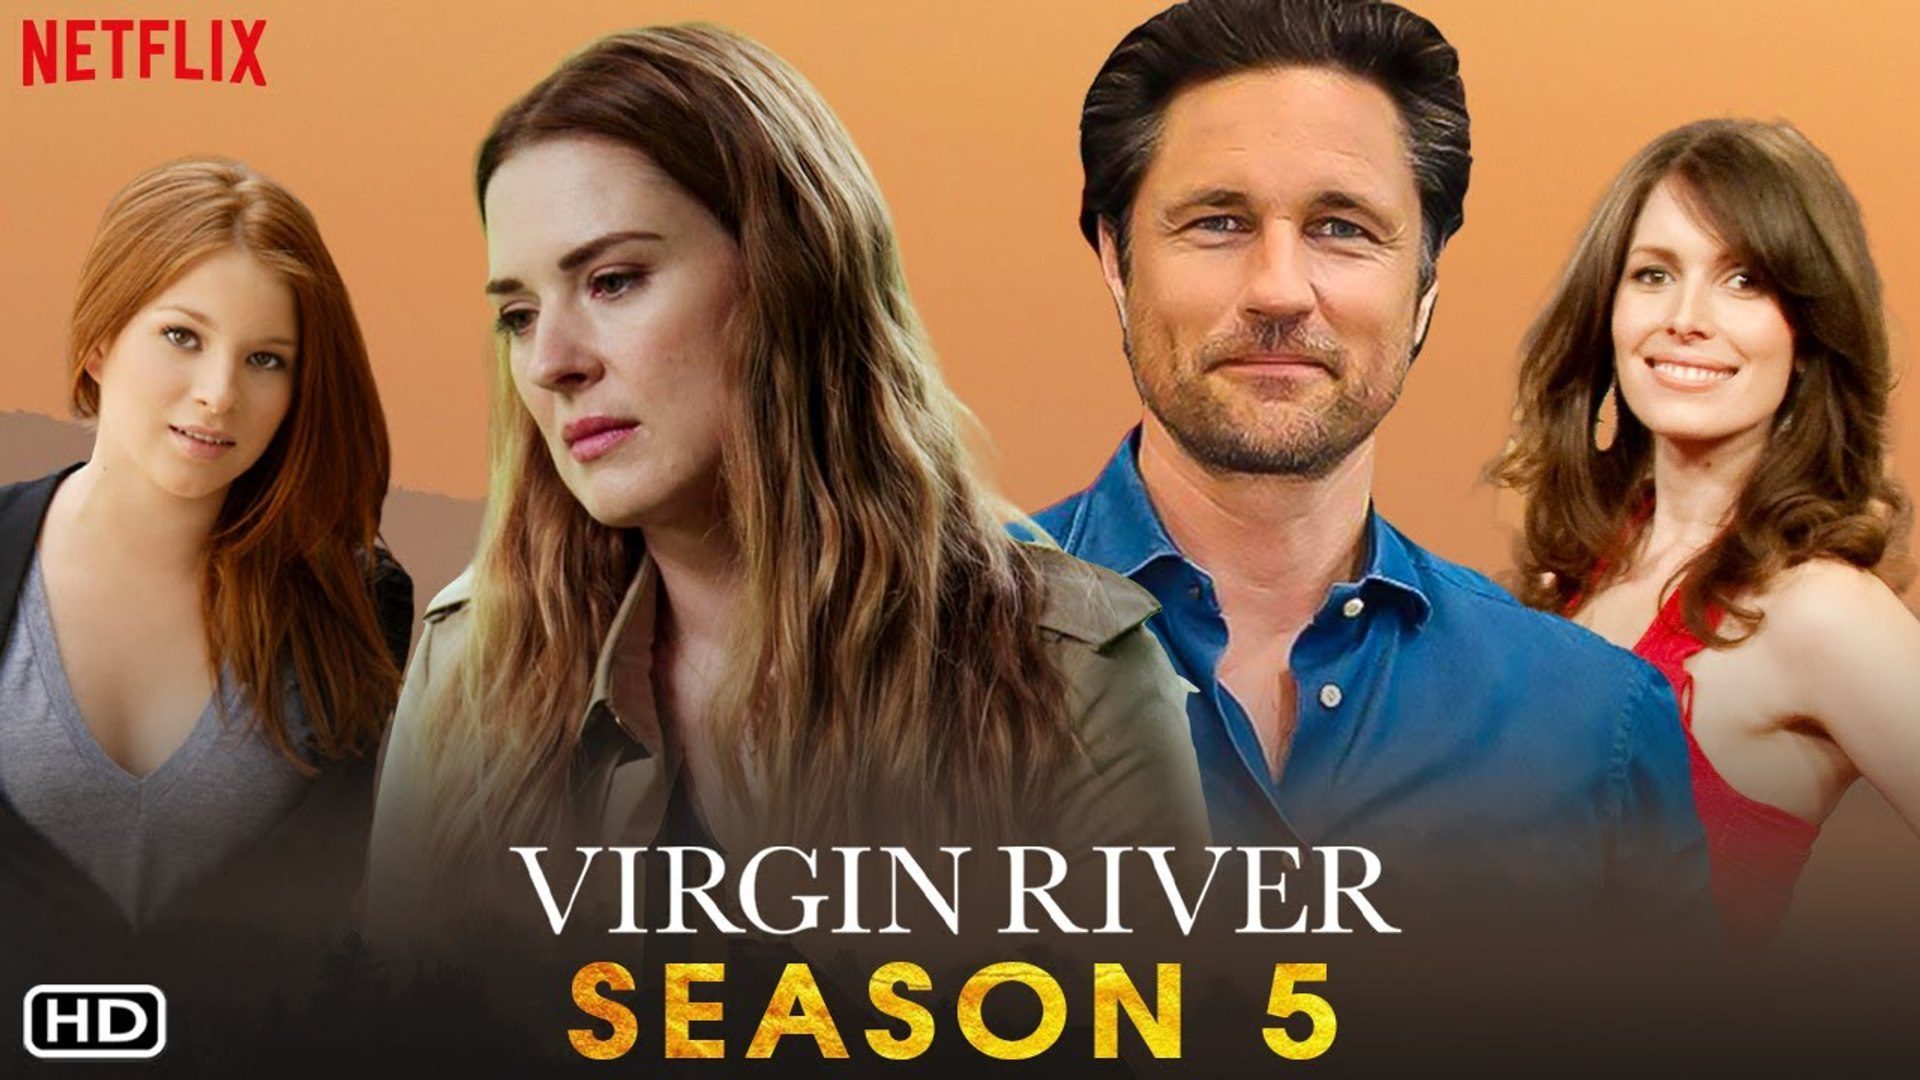 Will there be Virgin River Season 5?